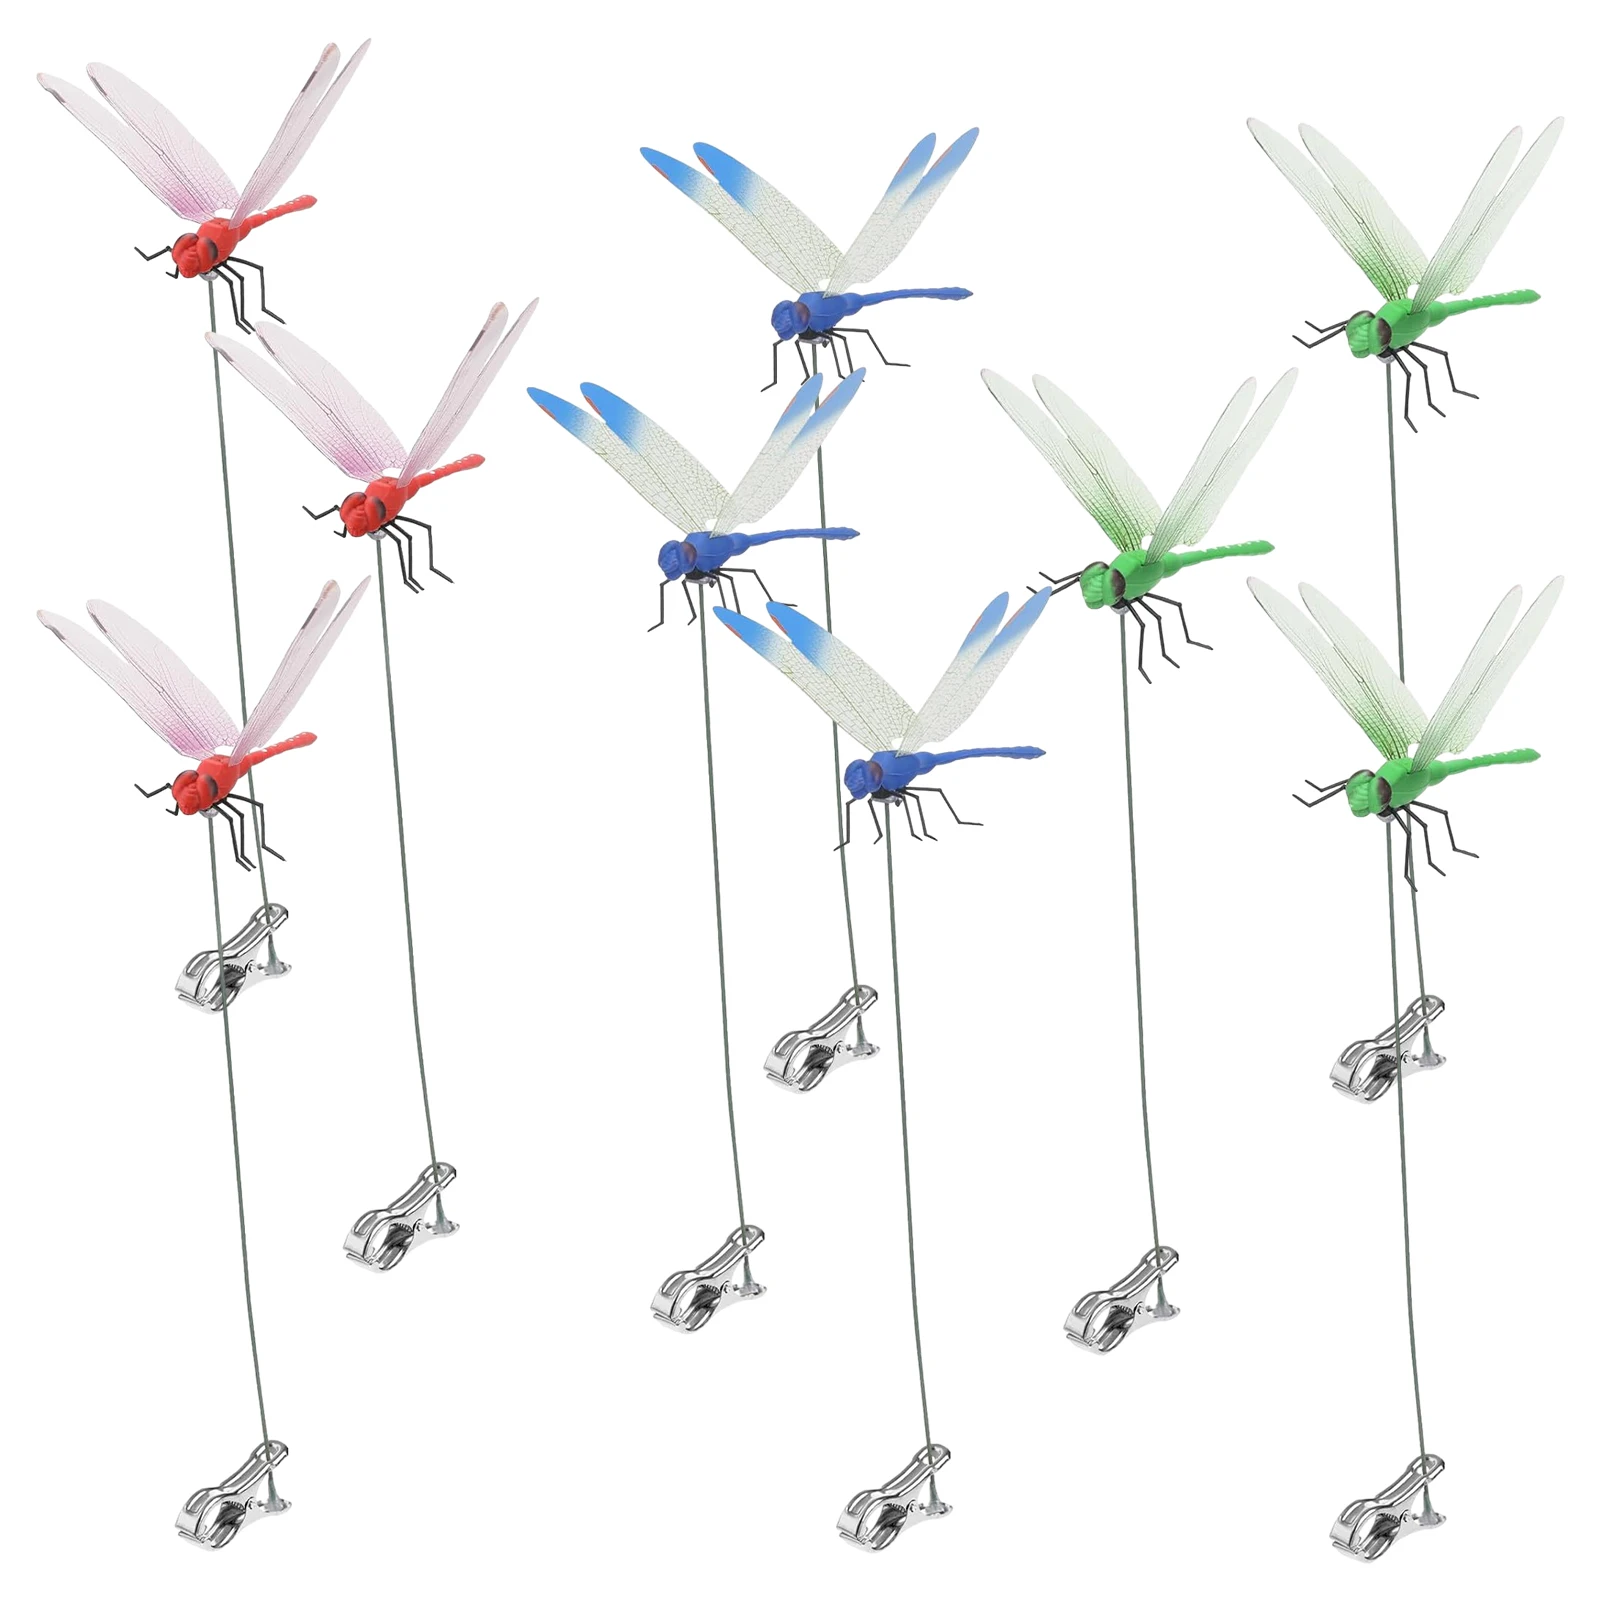 

9pcs/3sets Fake Dragonfly Pole Clip Lifelike 3D Multicolored Practical Crafts Artificial Home Accessories Outdoor Garden Decor